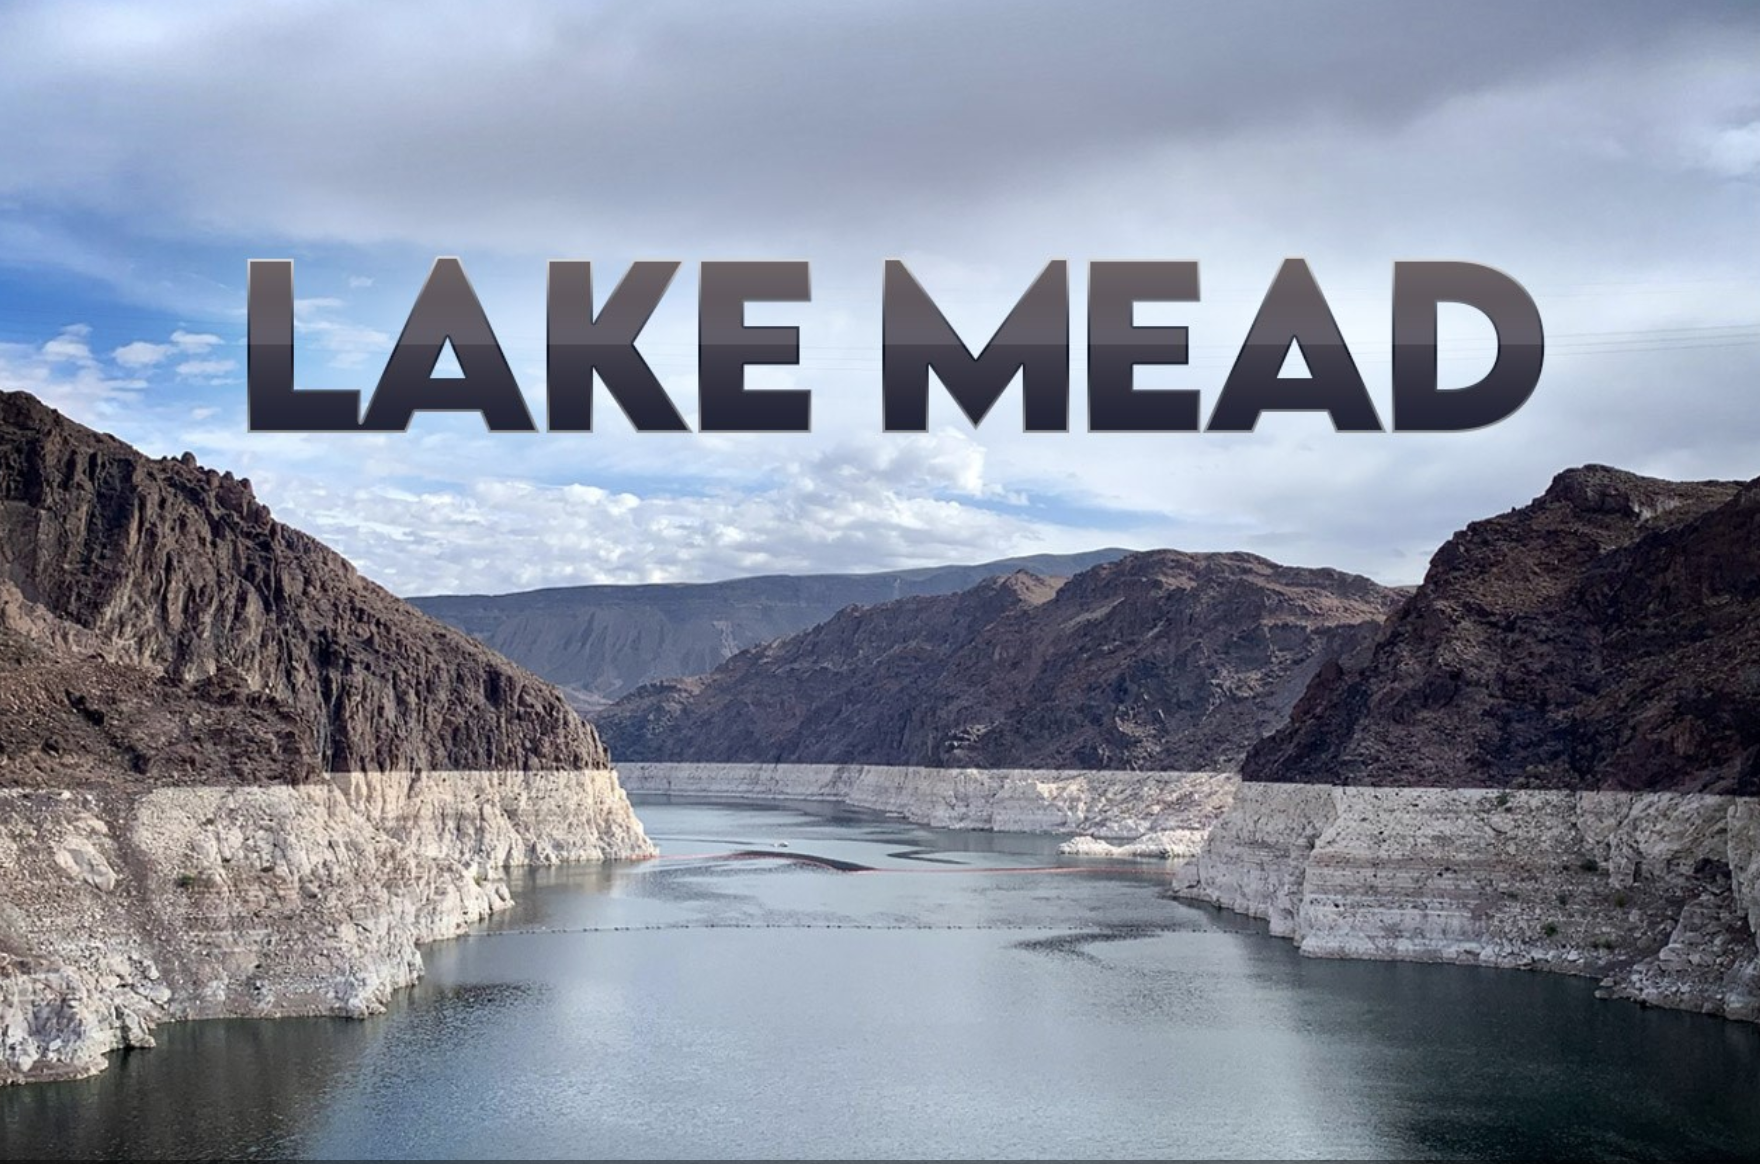 Lake Mead is a location for the Baumann Workshop tour 